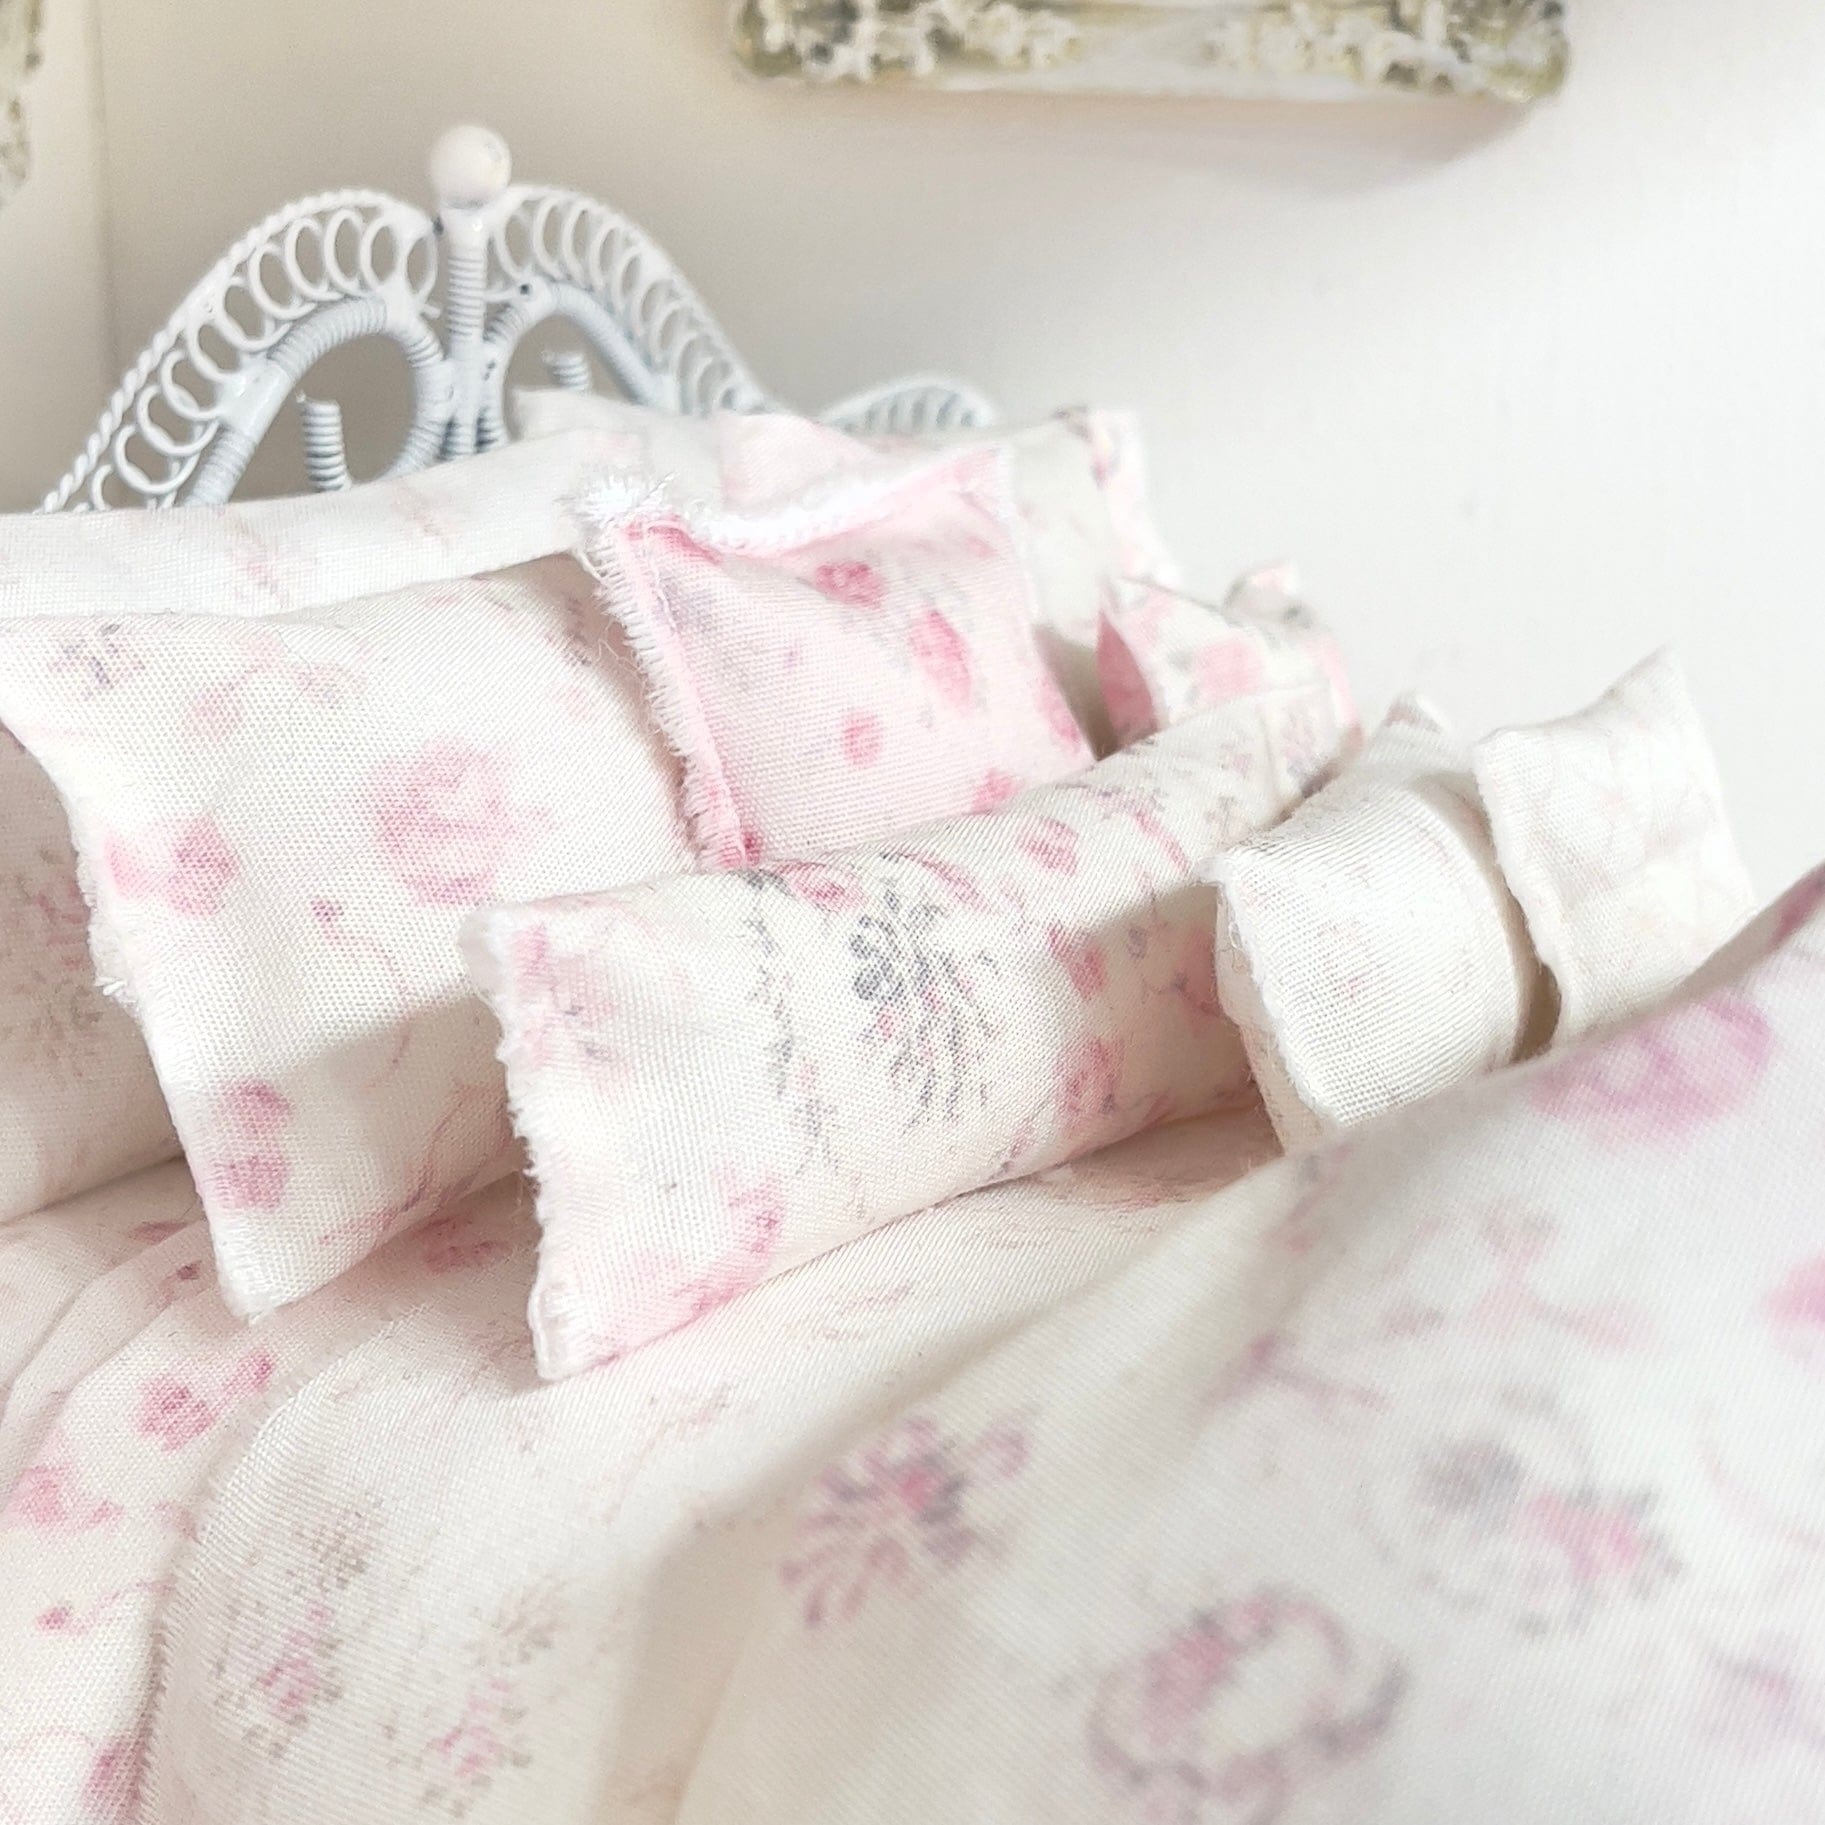 Chantallena Doll House Dressed Bed |Assorted Pink Floral Cotton with Floral Bow Accent | Flossie